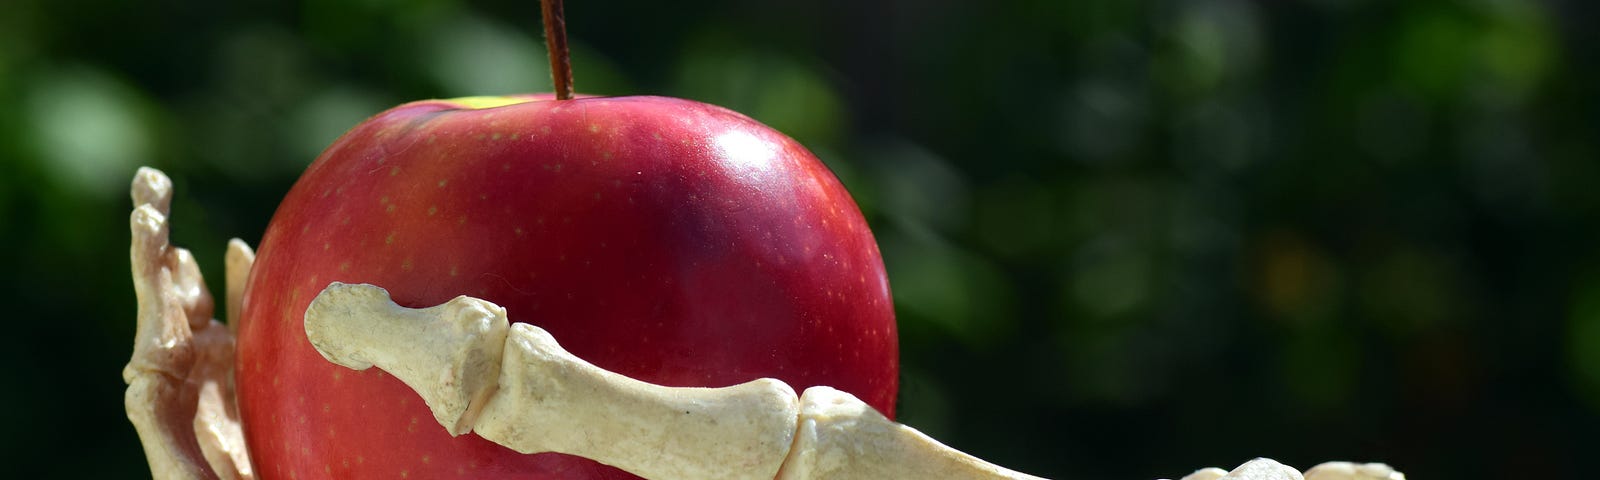 A skeleton hand holding a red apple.